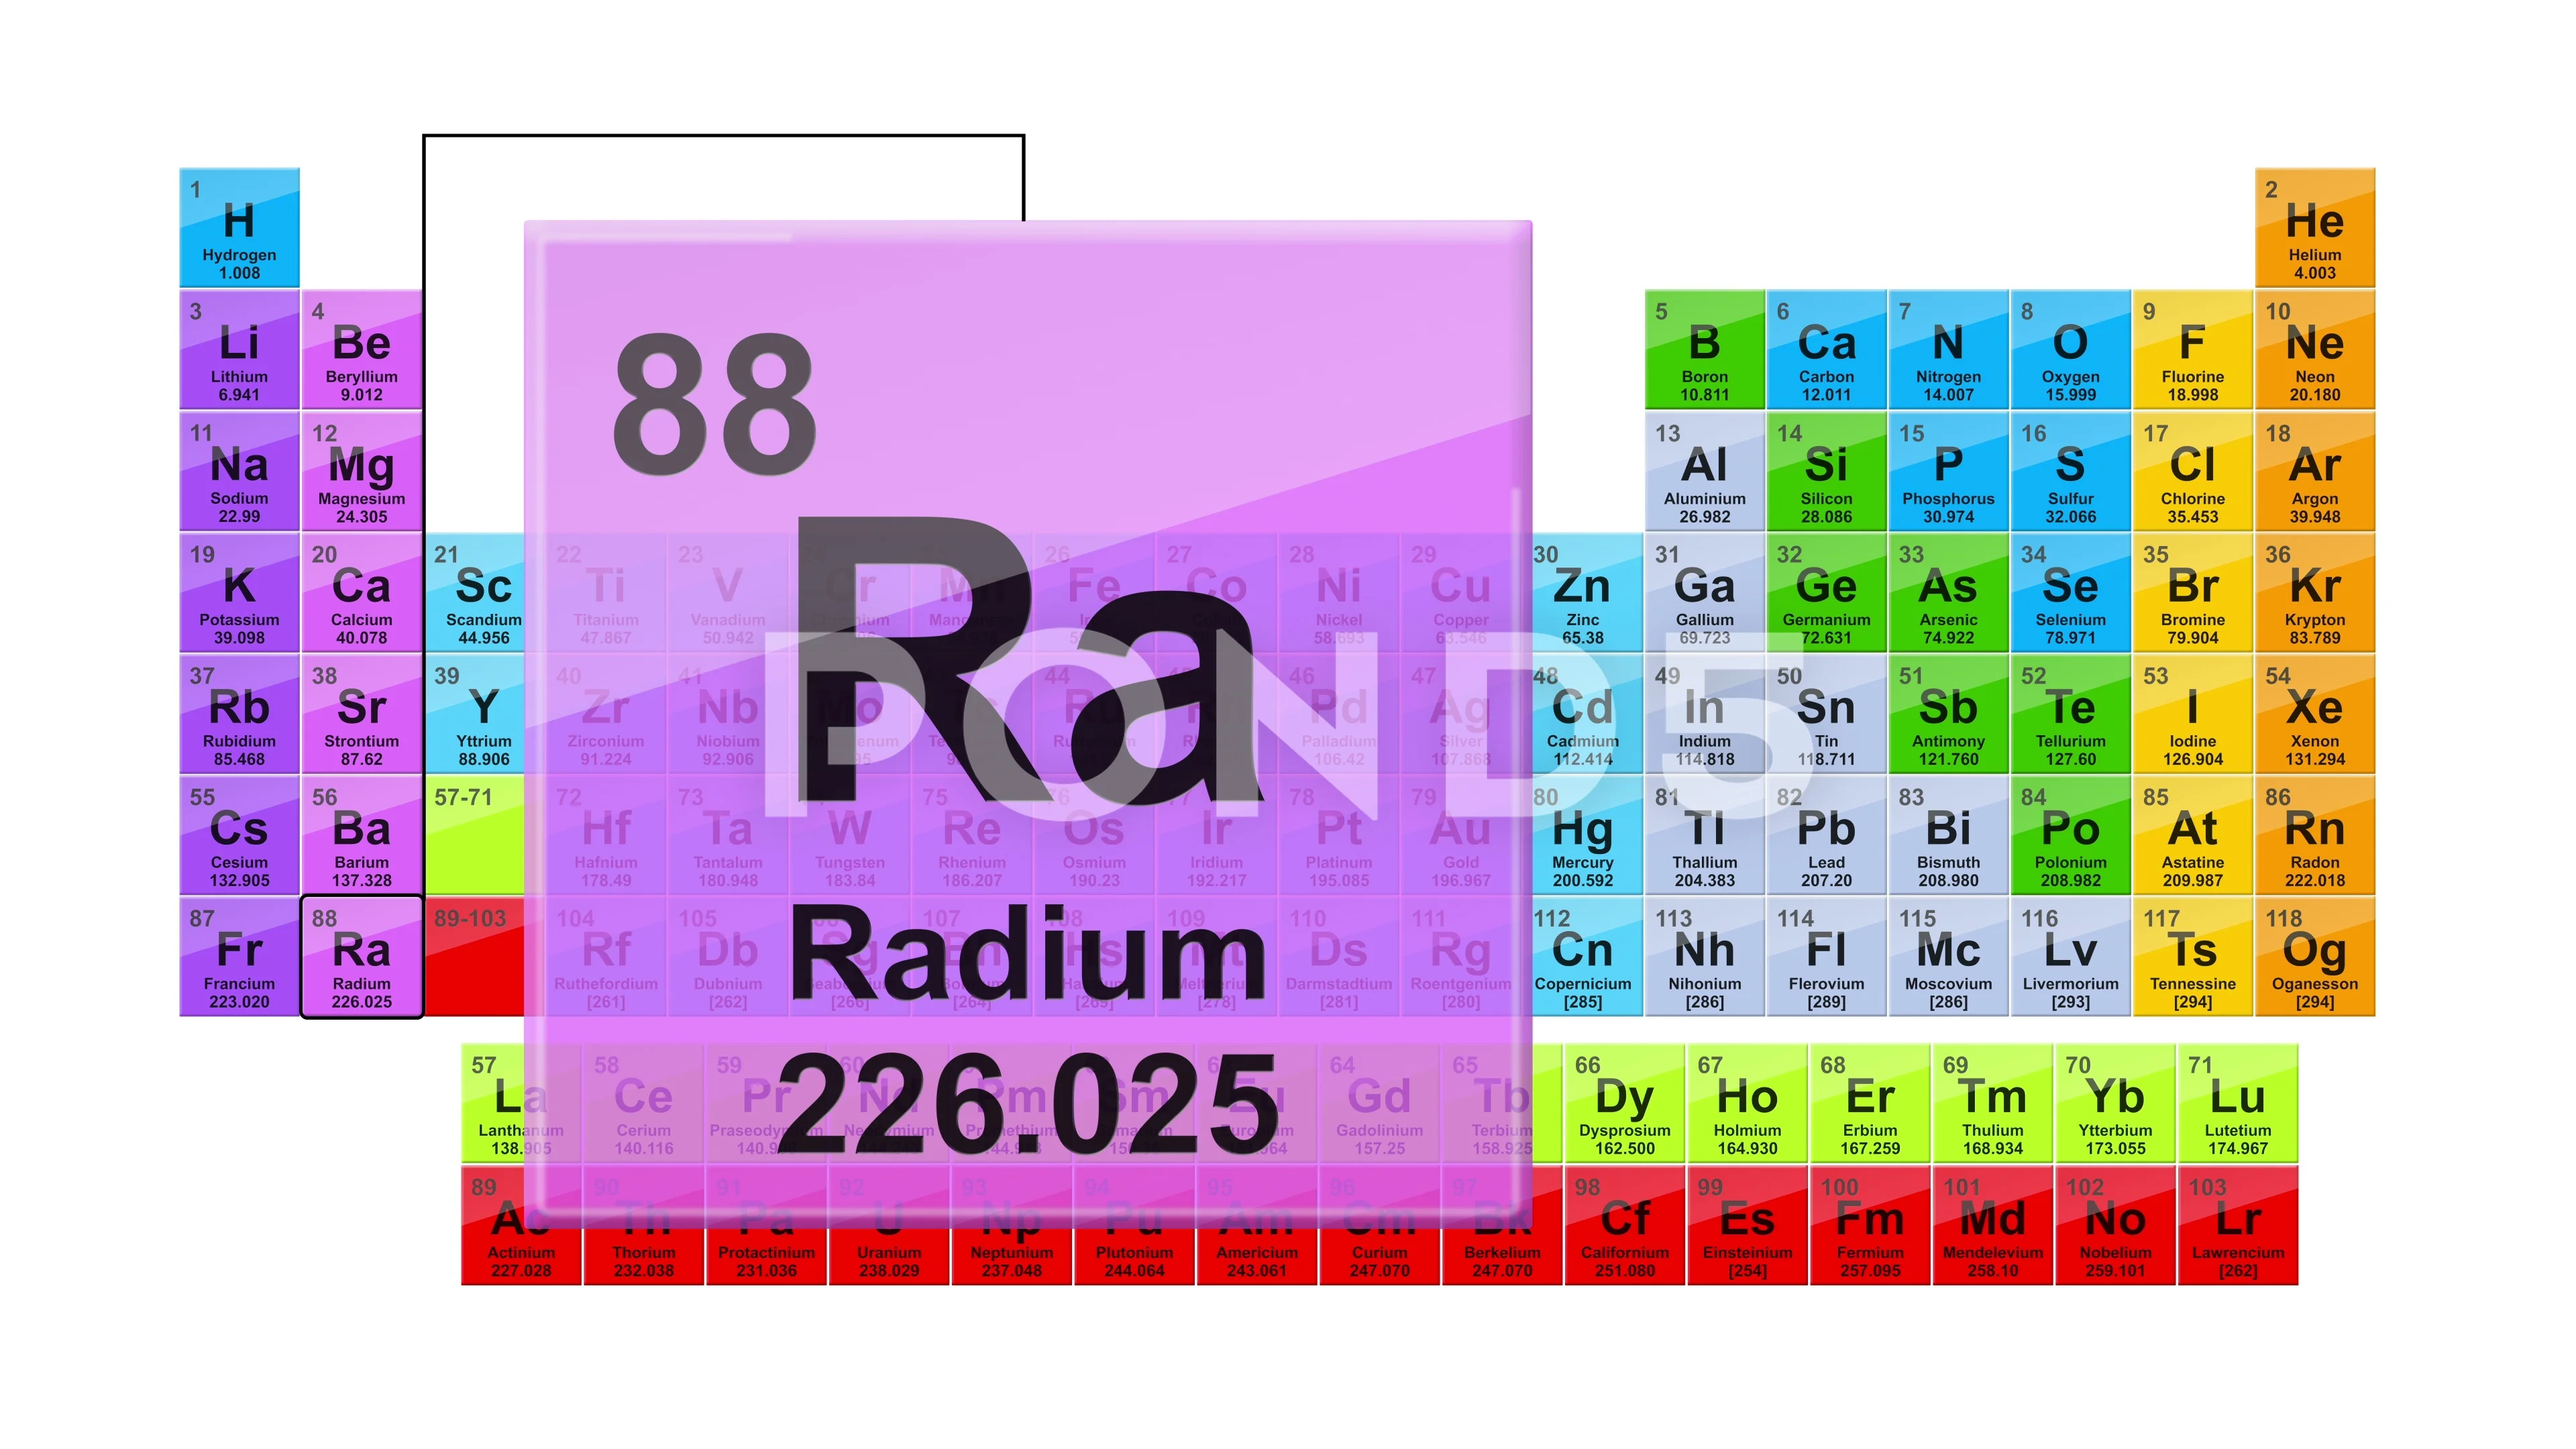 What elements is rubidium-87 strontium-87 dating effective for?